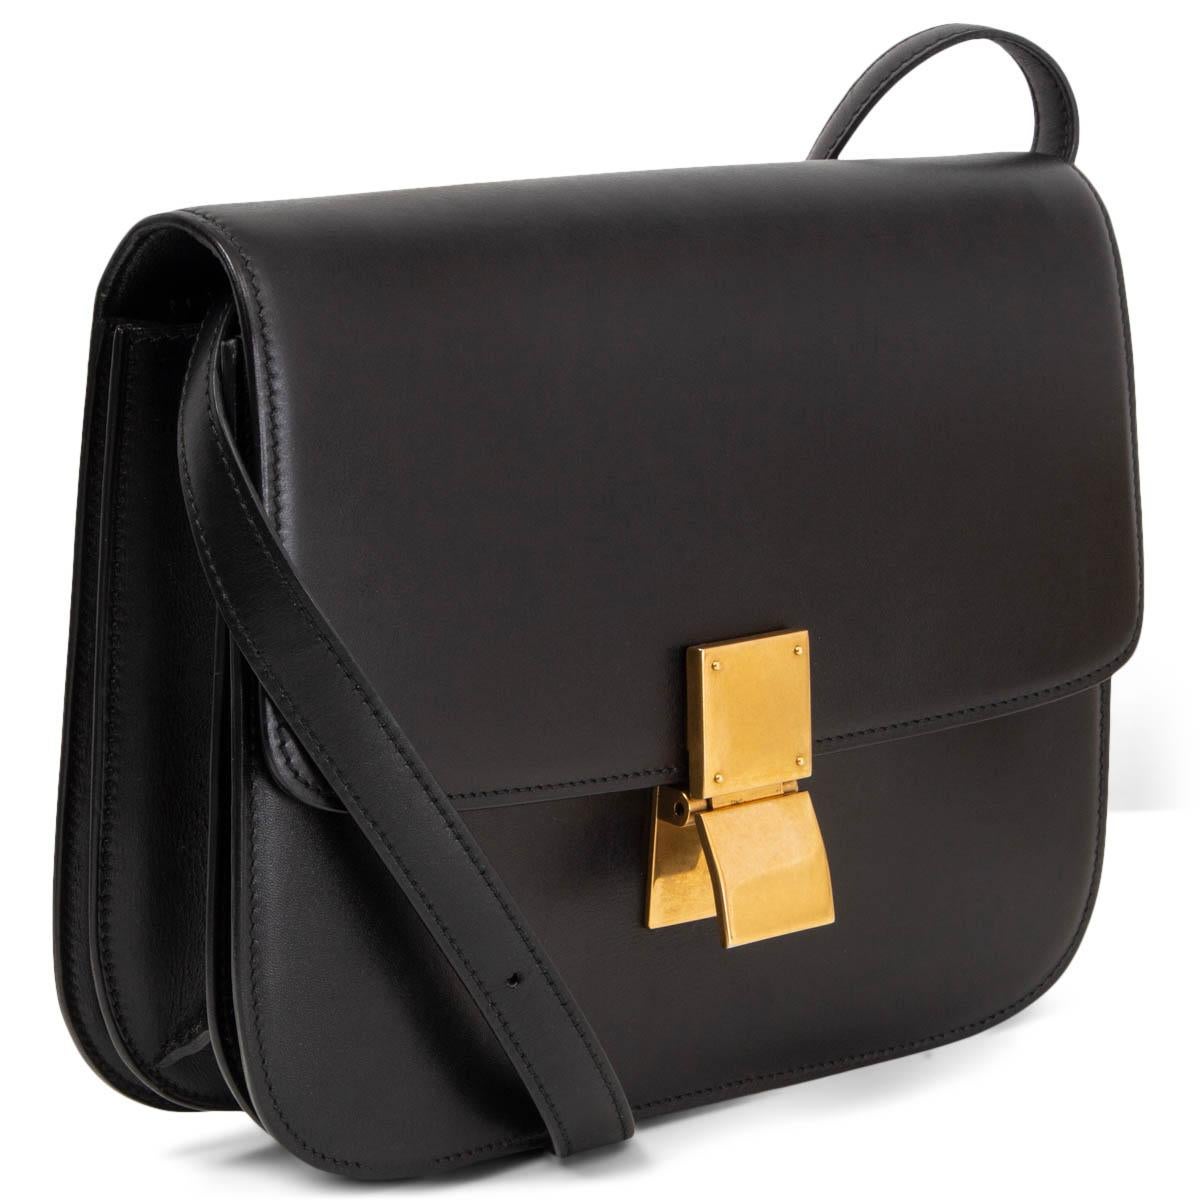 100% authentic Céline Medium Classic shoulder bag in black box calfskin. Opens with a gold-tone push-lock on the front. The inside is divided into two compartments with two open pockets against the front and a zipper pocket against the back. Lined